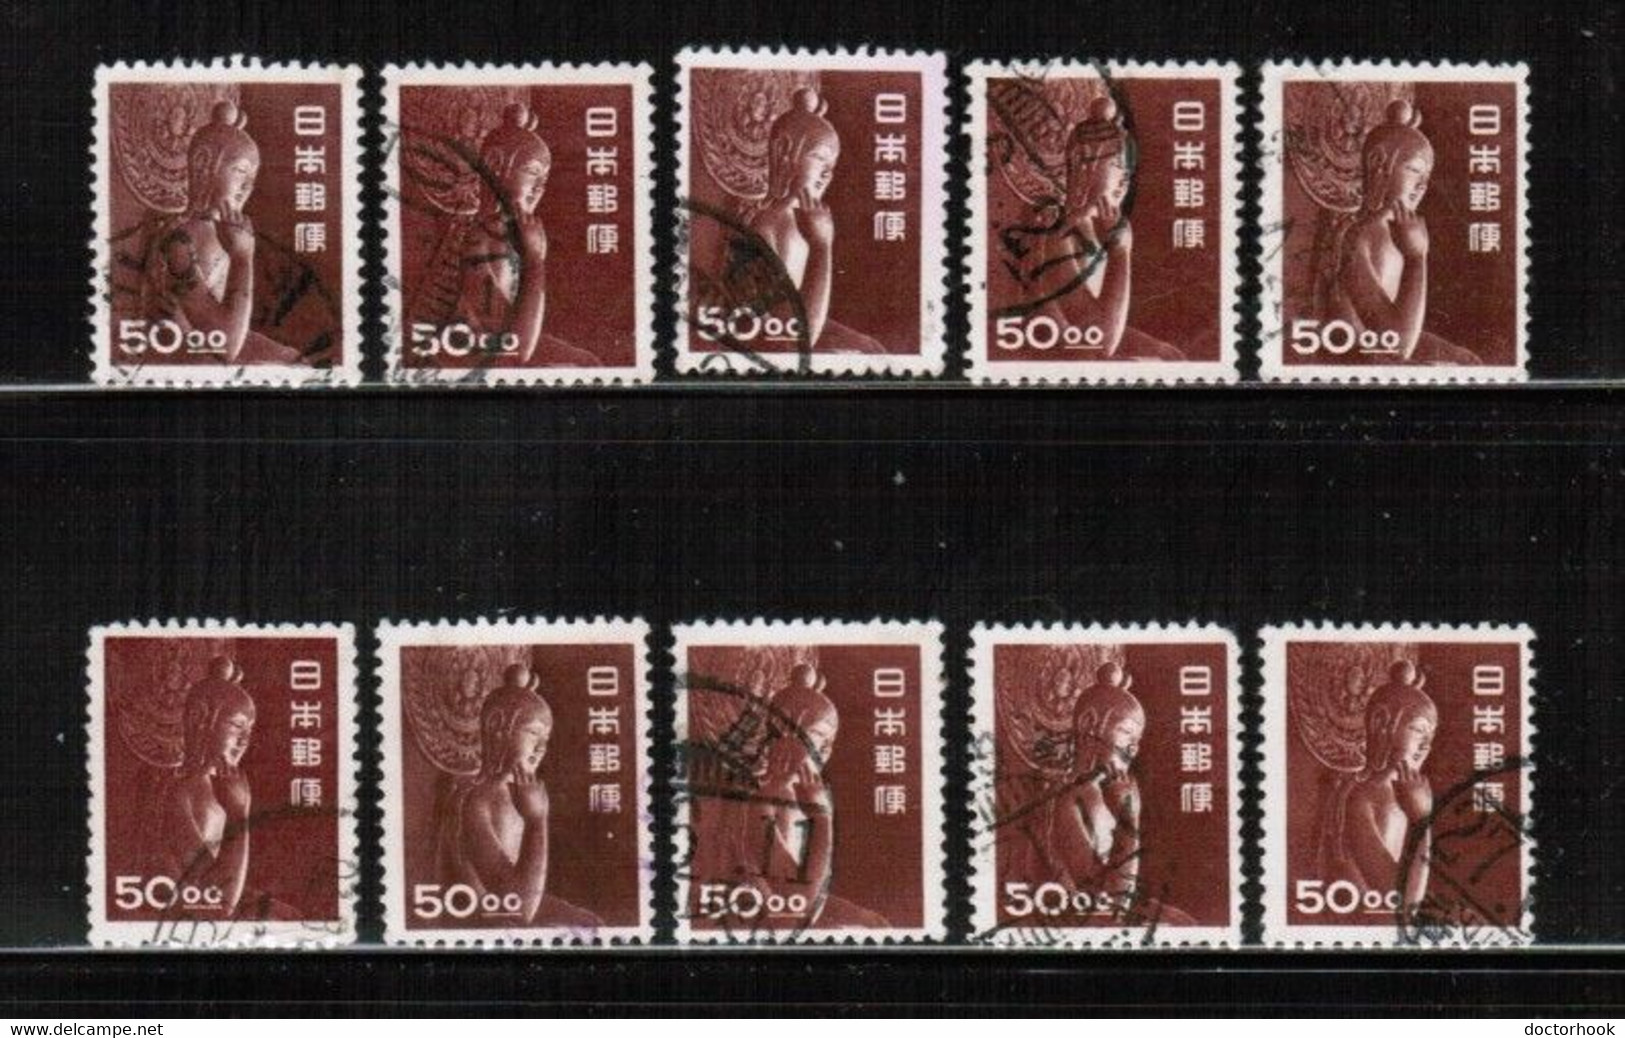 JAPAN   Scott # 521 USED WHOLESALE LOT OF 10 (CONDITION AS PER SCAN) (WH-600) - Colecciones & Series